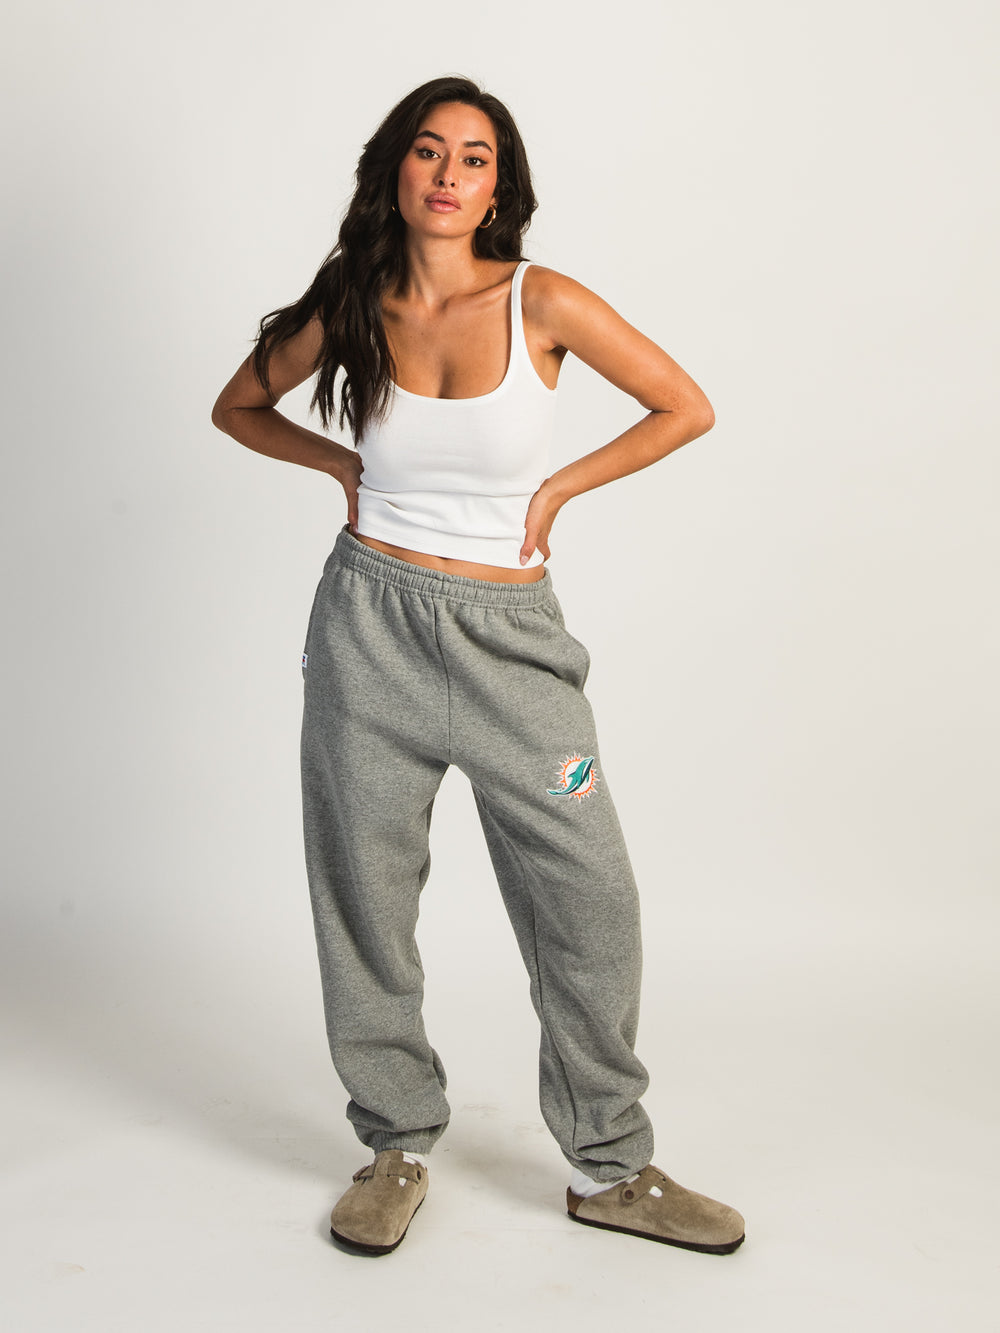 RUSSELL MIAMI DOLPHINS EMBROIDERED SWEATPANTS